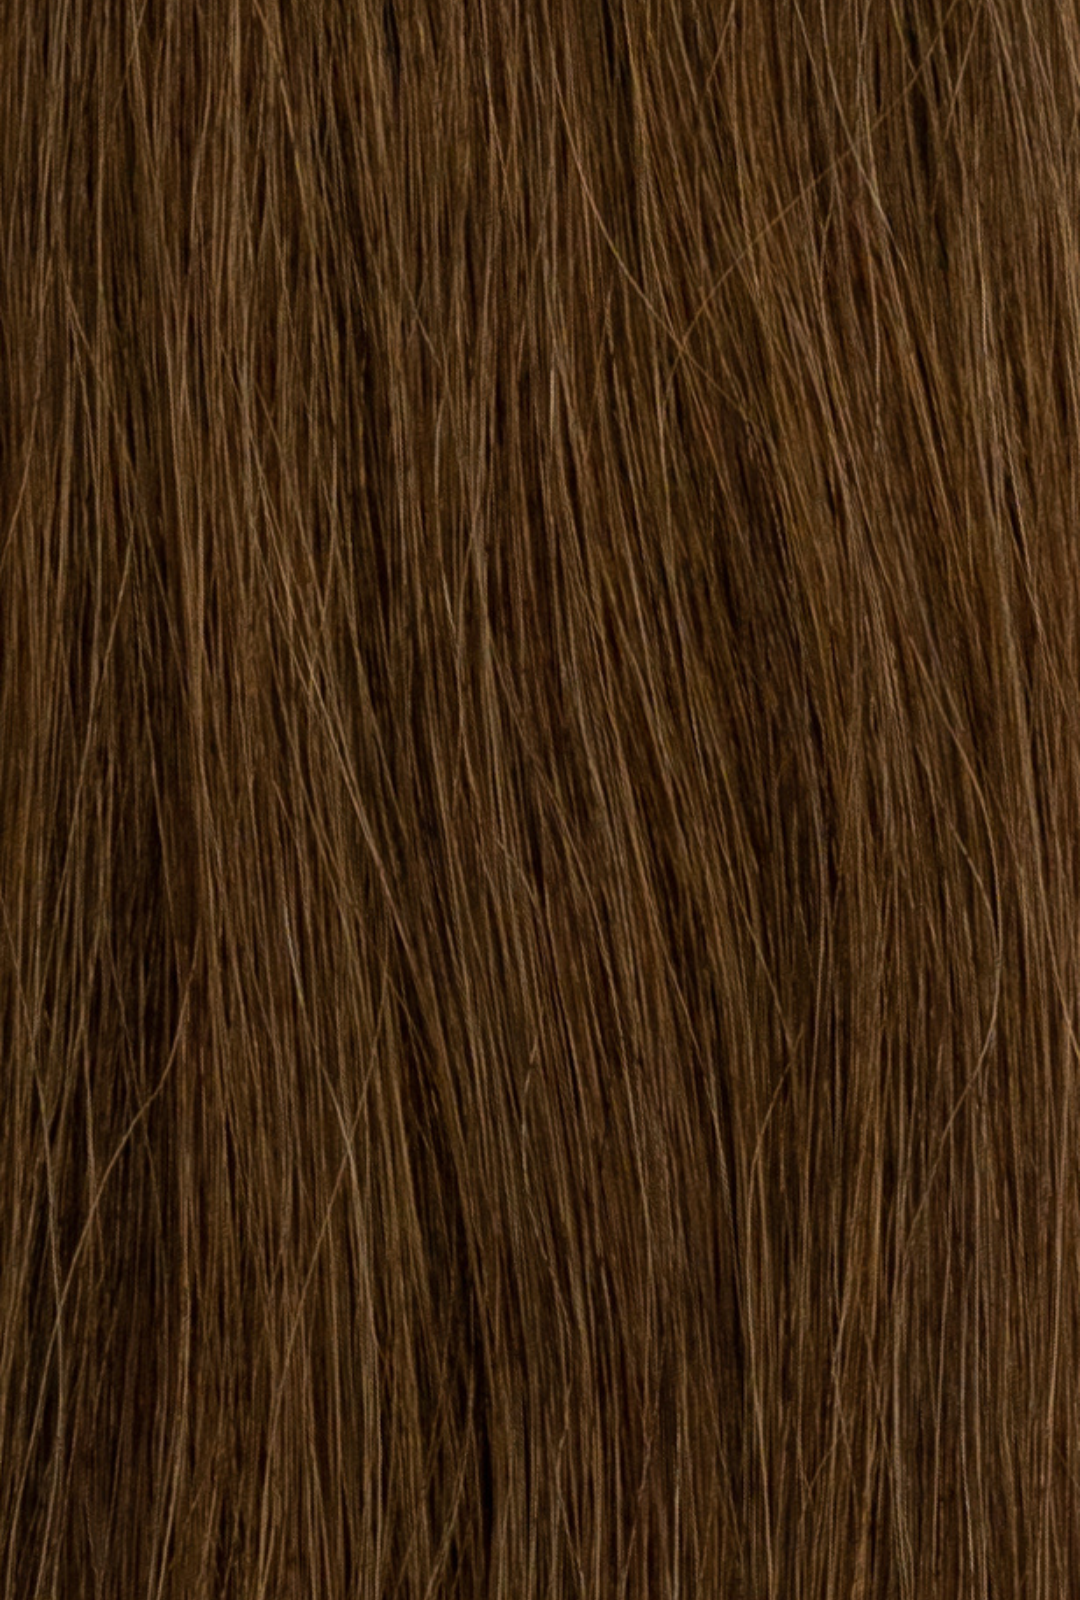 Laced Hair Machine Sewn Weft Extensions #5 (Caramel)